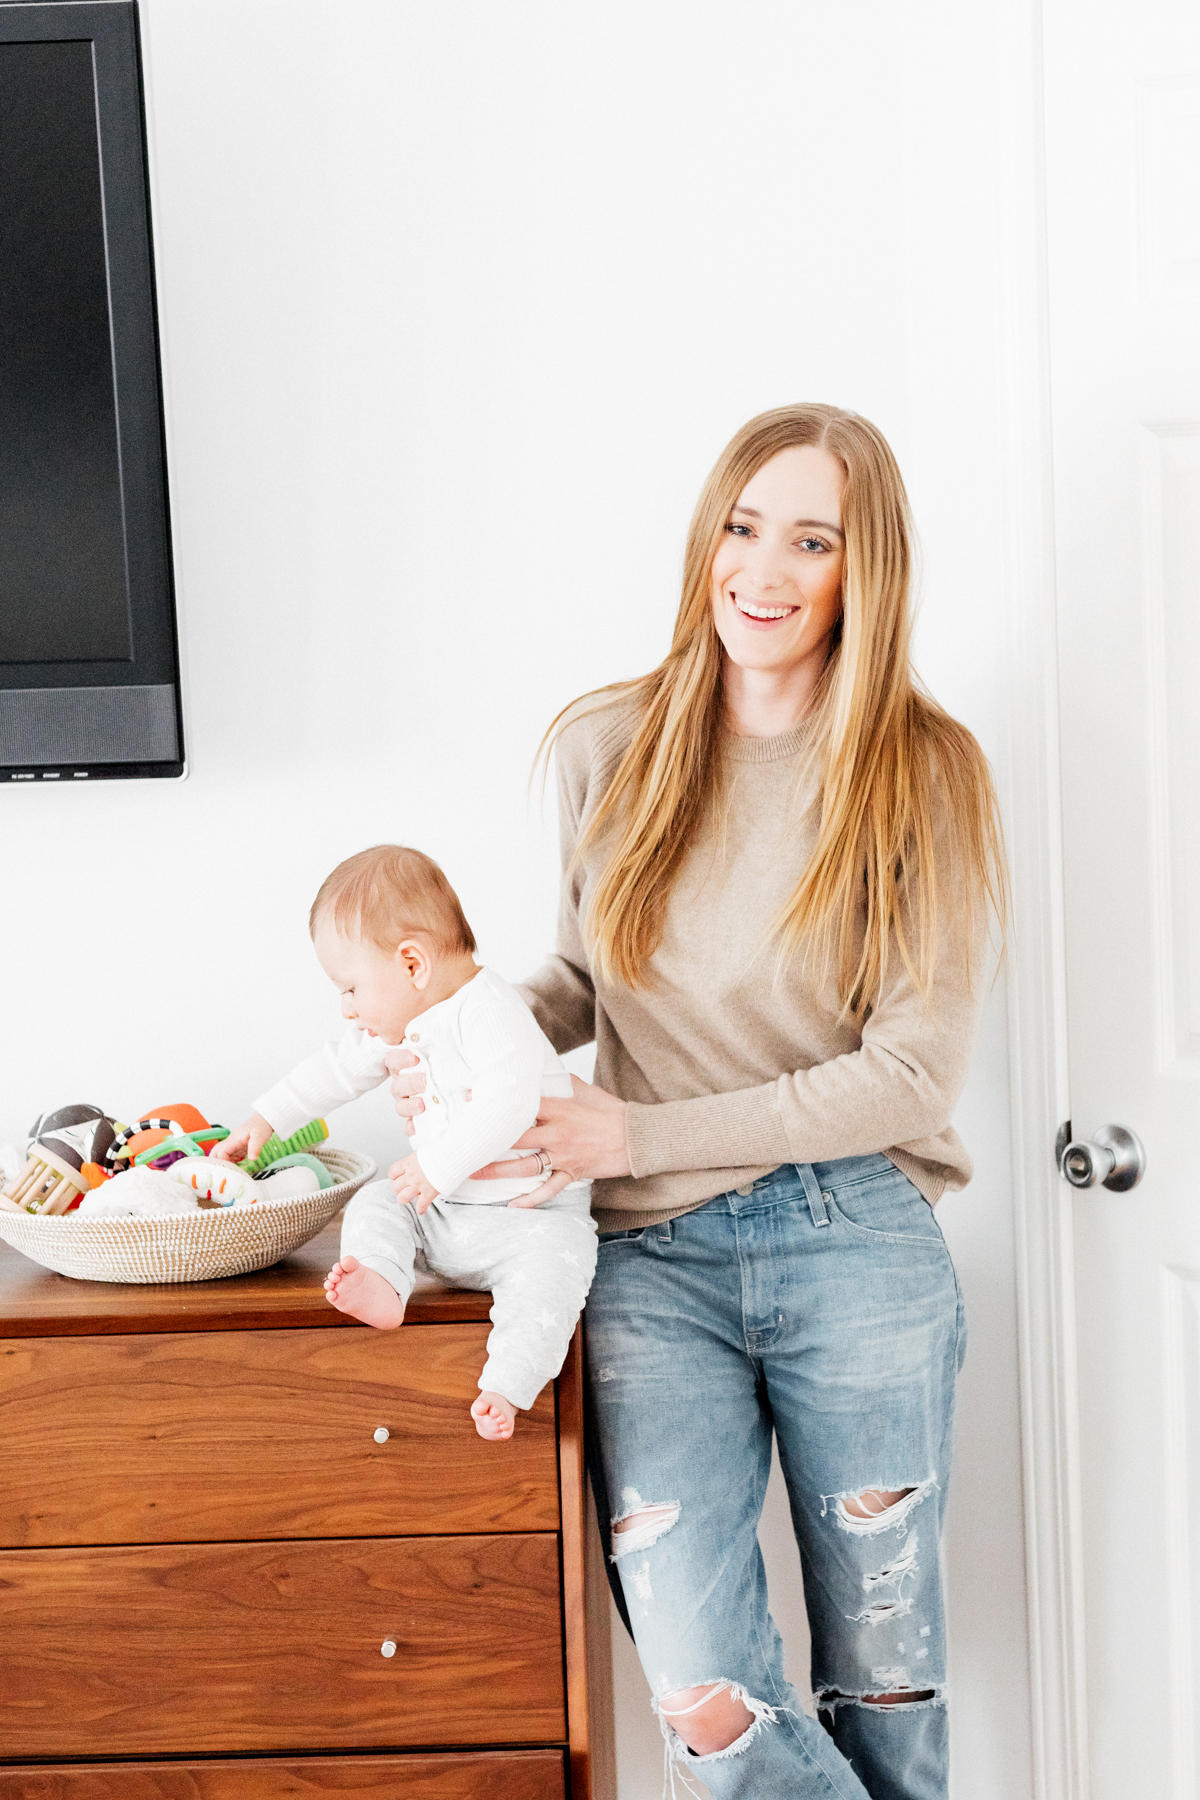 Baby Toys / 0-6 Months » eat.sleep.wear. – Fashion & Lifestyle Blog by Kimberly  Lapides